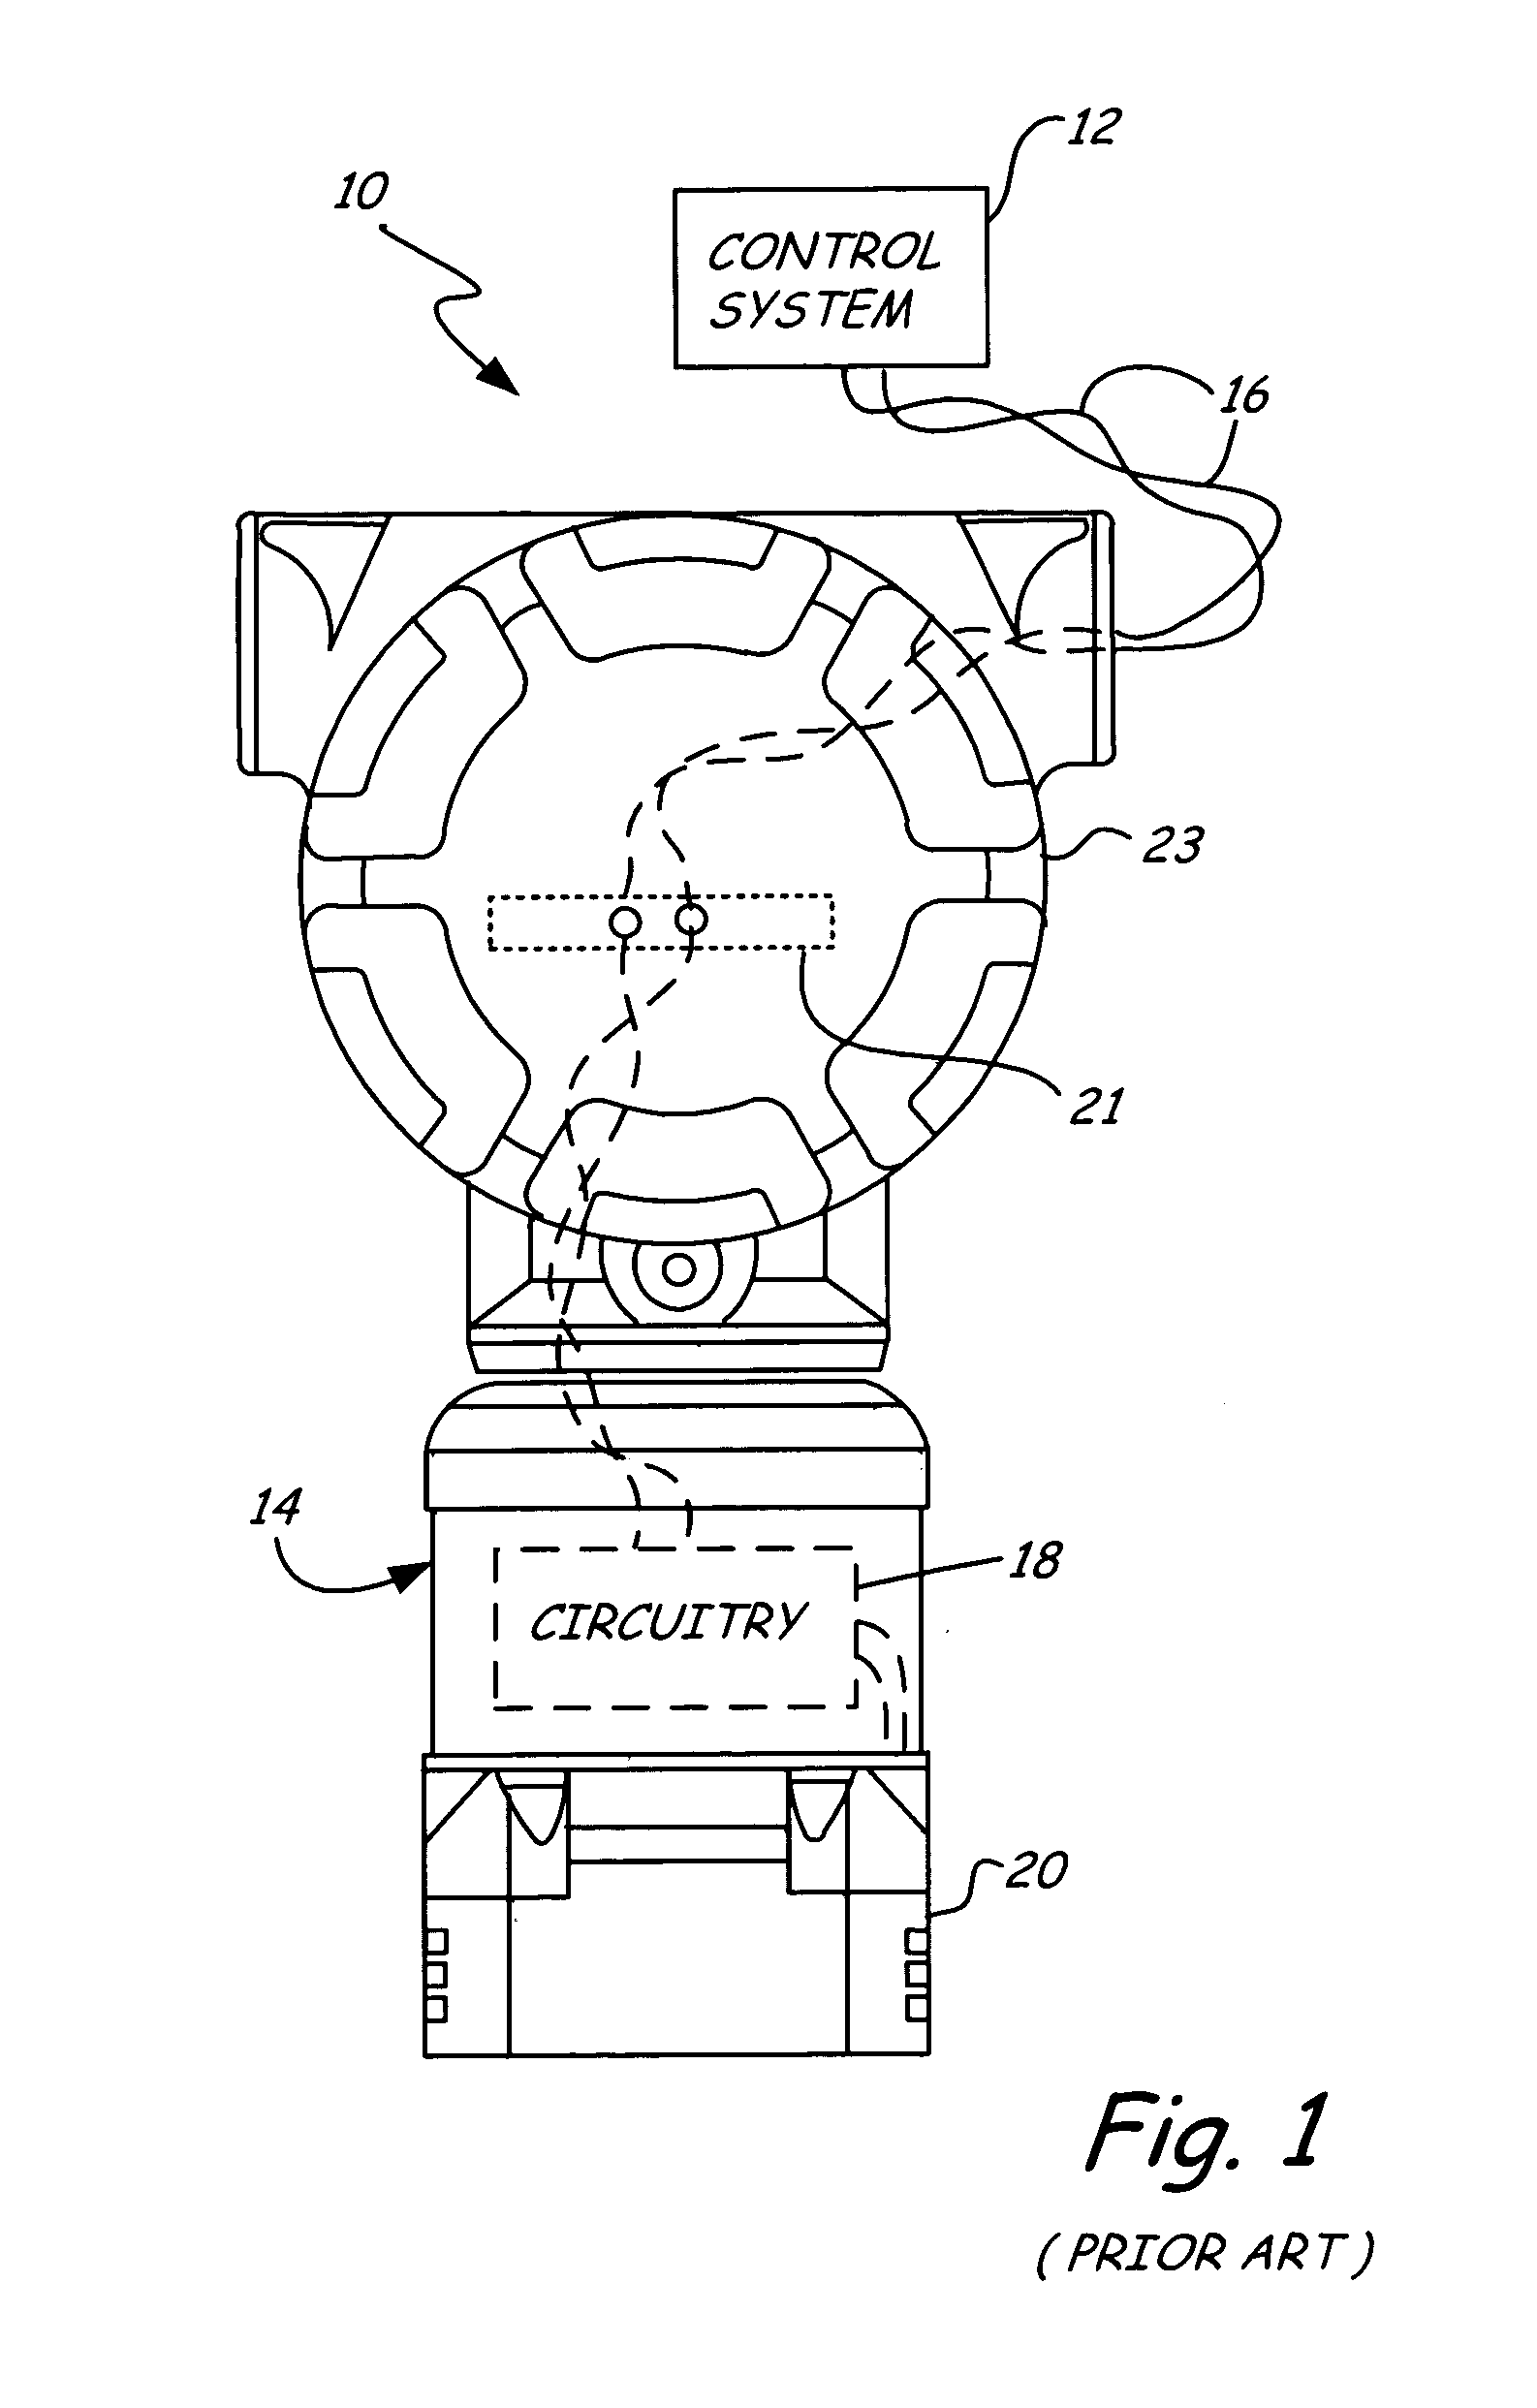 Wireless power and communication unit for process field devices